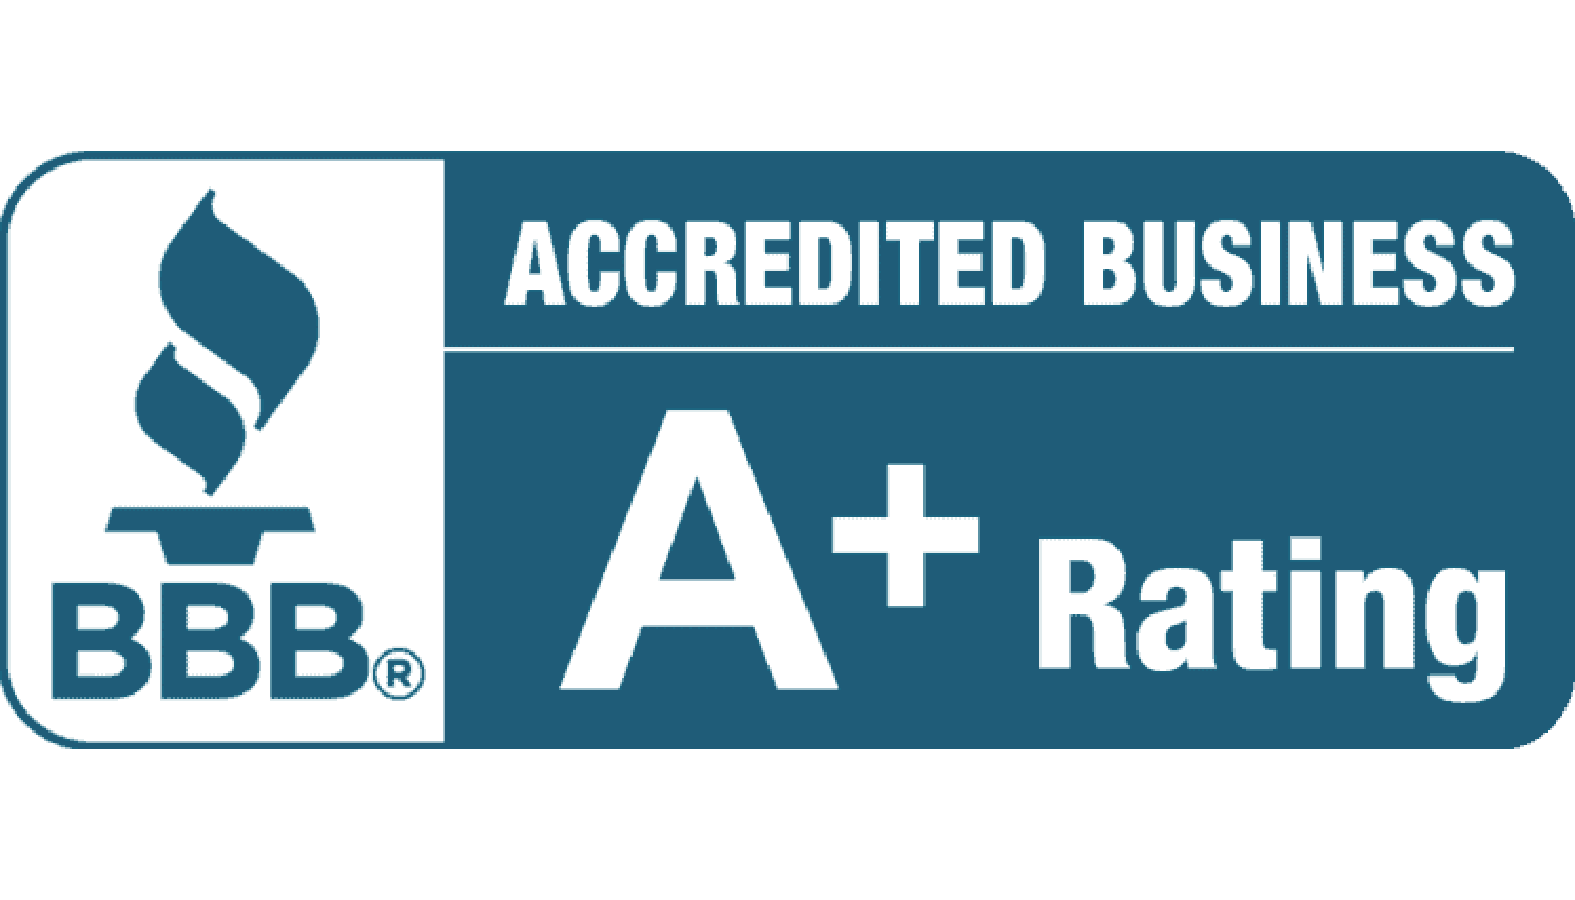 BBB Accredited Business A+ Rating Award